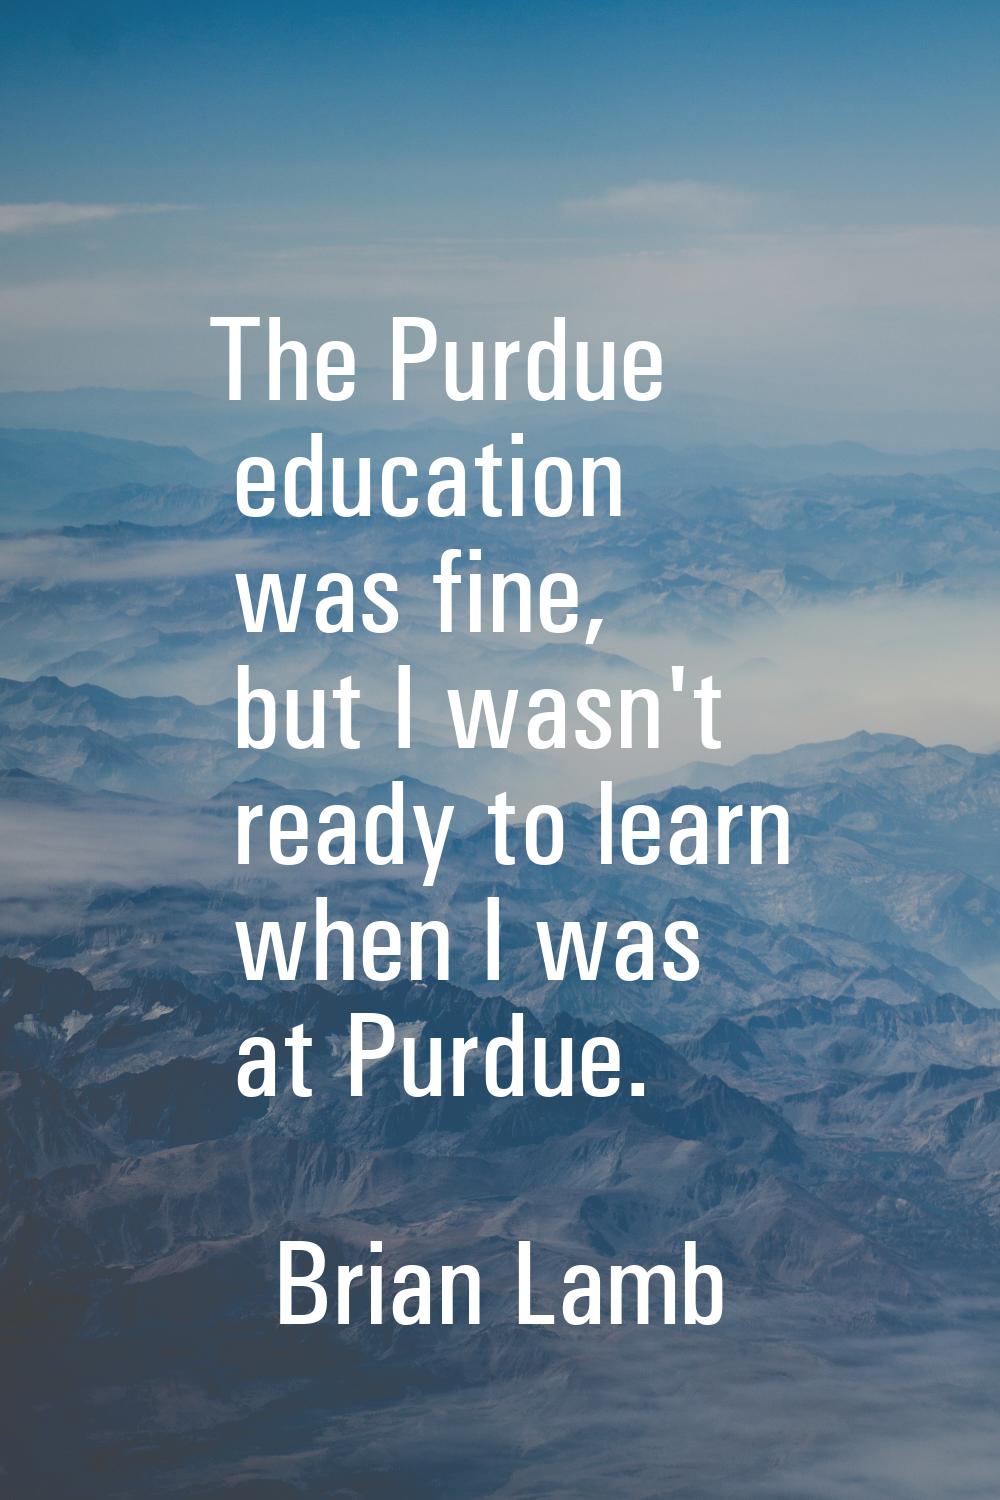 The Purdue education was fine, but I wasn't ready to learn when I was at Purdue.